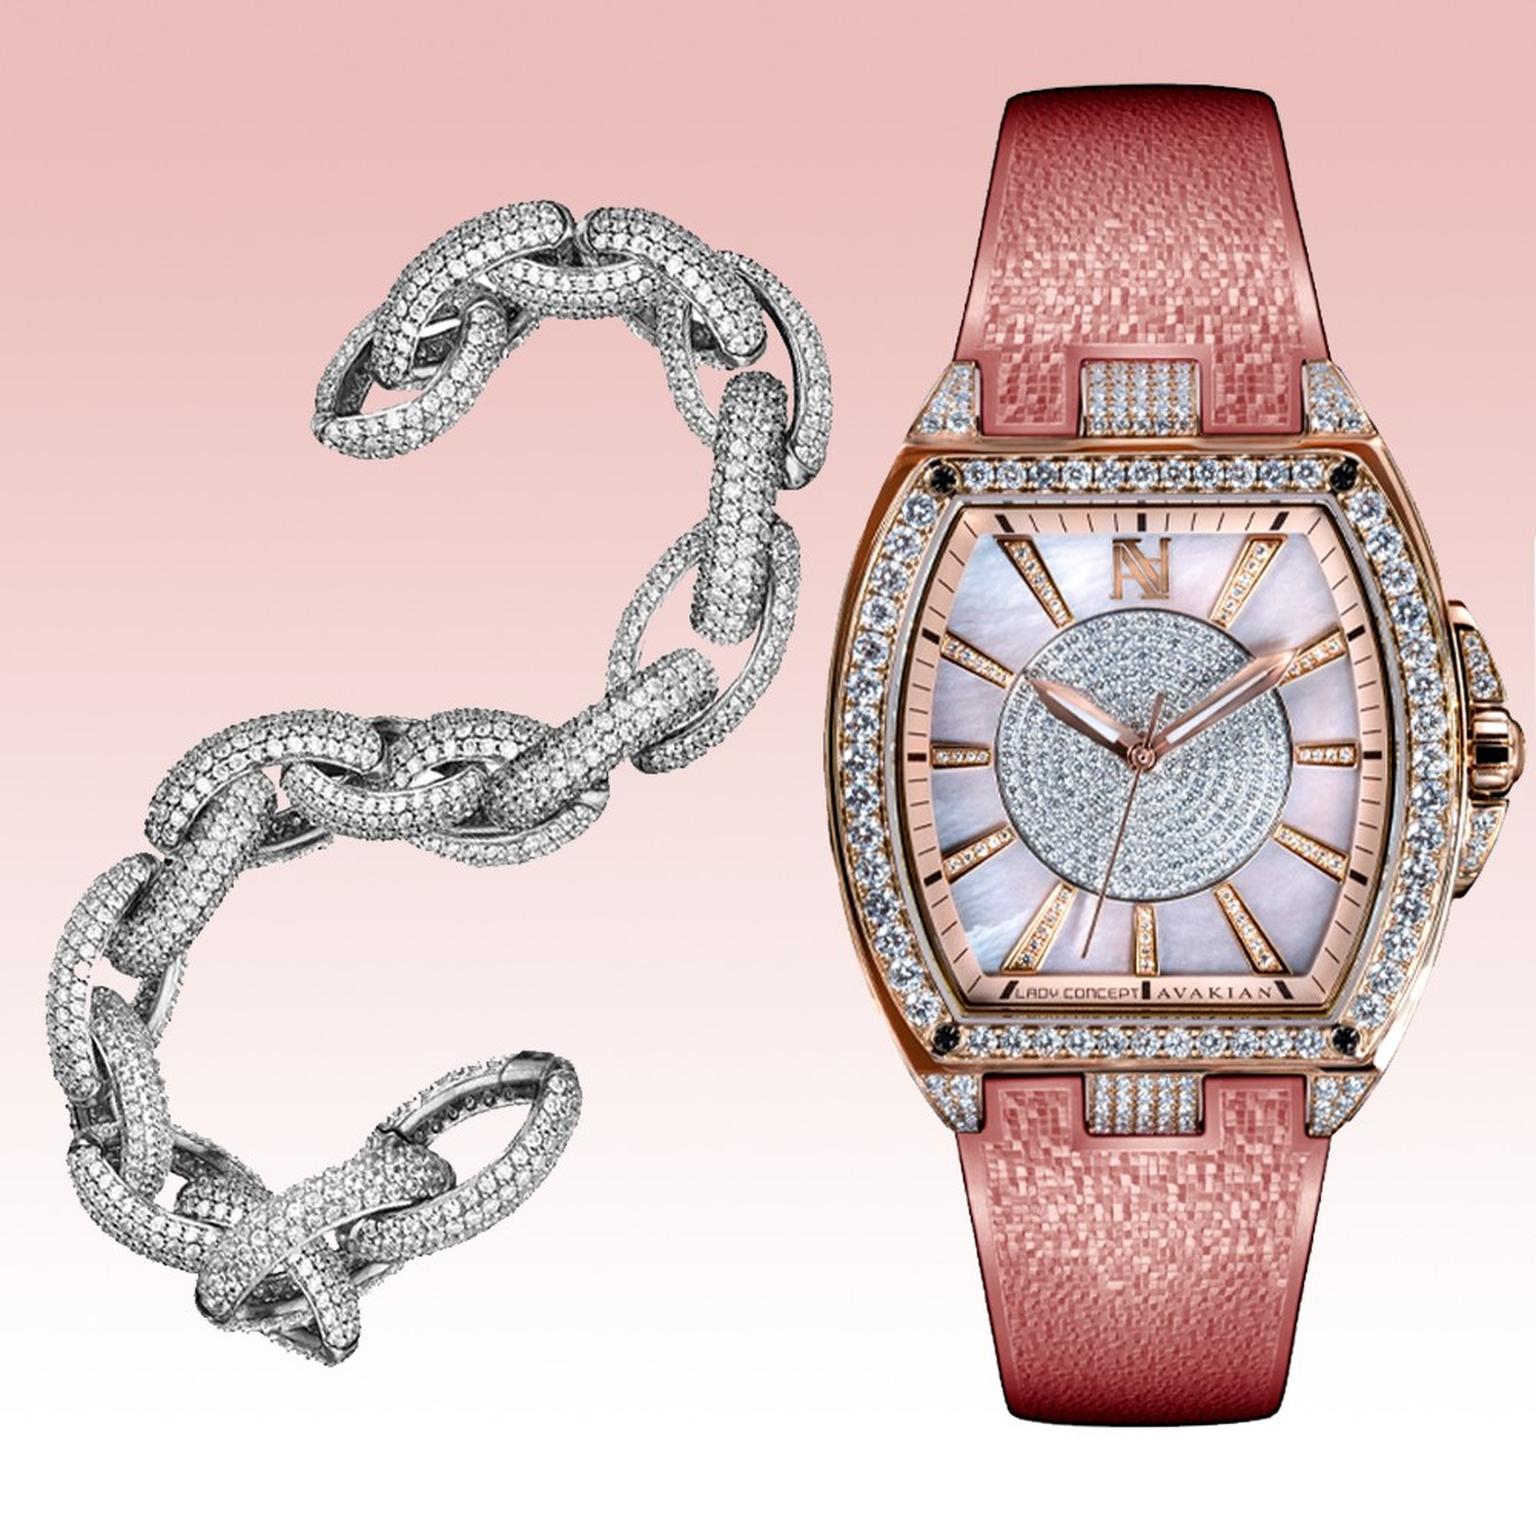 Avakian Lady Concept watch in pink